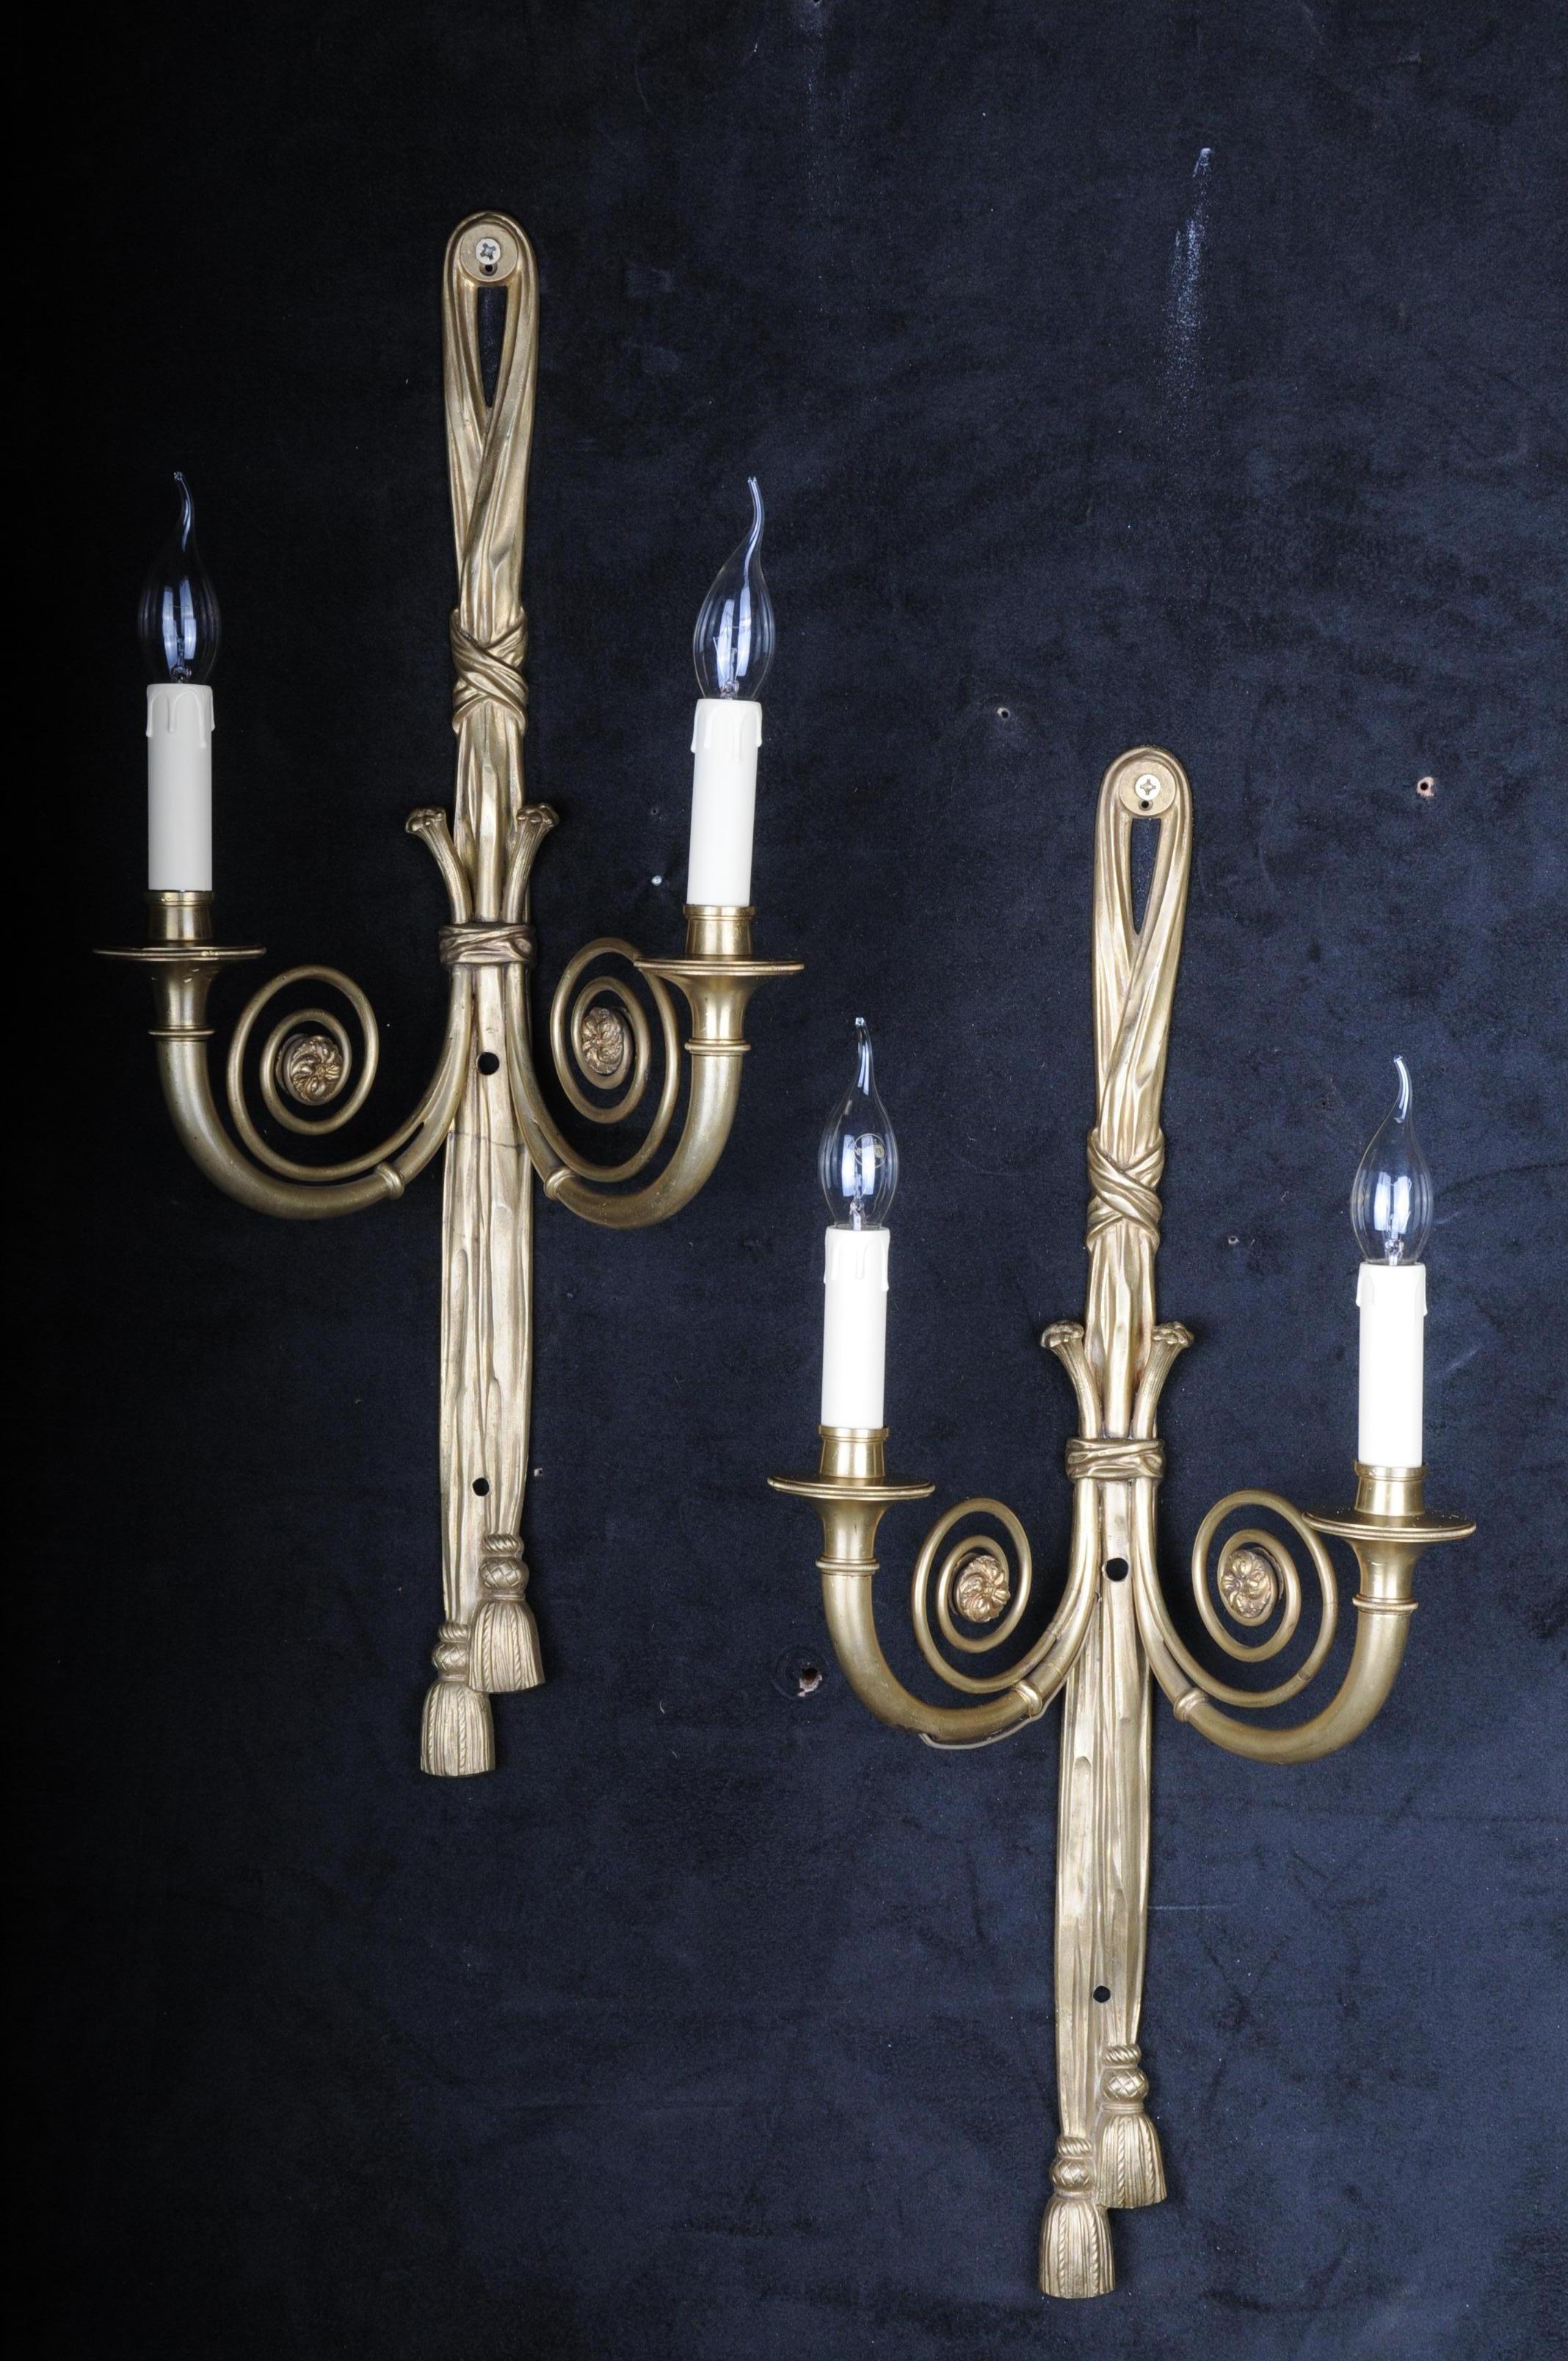 Pair (2) French wall appliques / wall sconces, early 20th century

The shaft of the column is chiselled in bronze and crowned by plastic, classicistic ribbons. 2 light arms each, electrified.